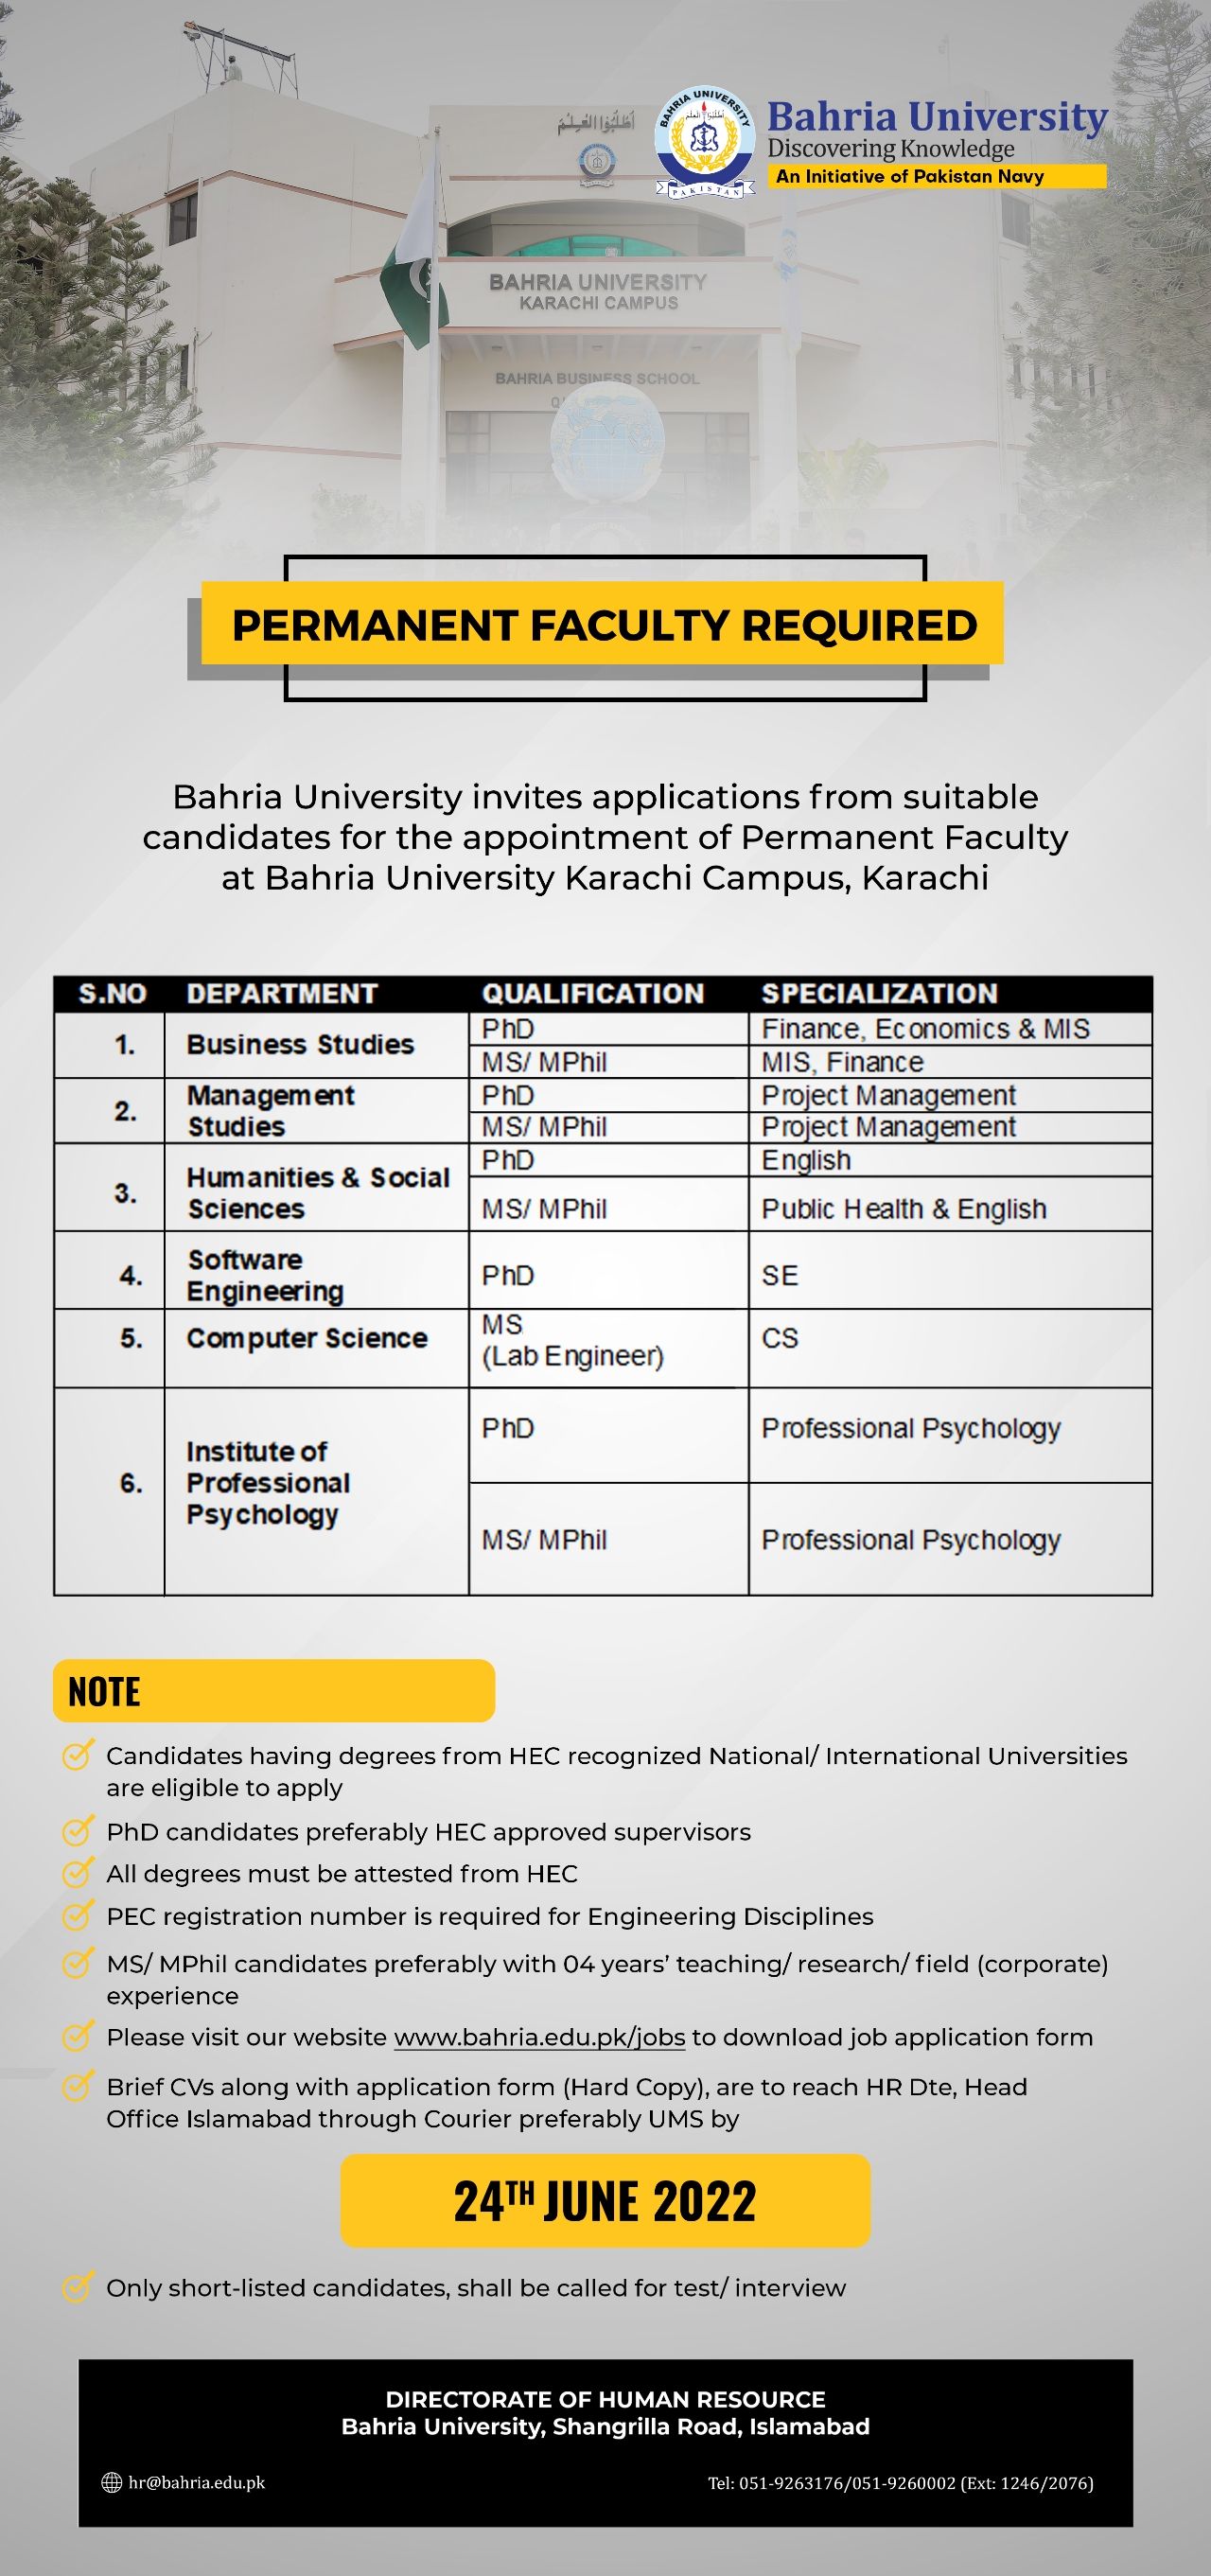 PERMANENT FACULTY REQUIRED In Bahria University